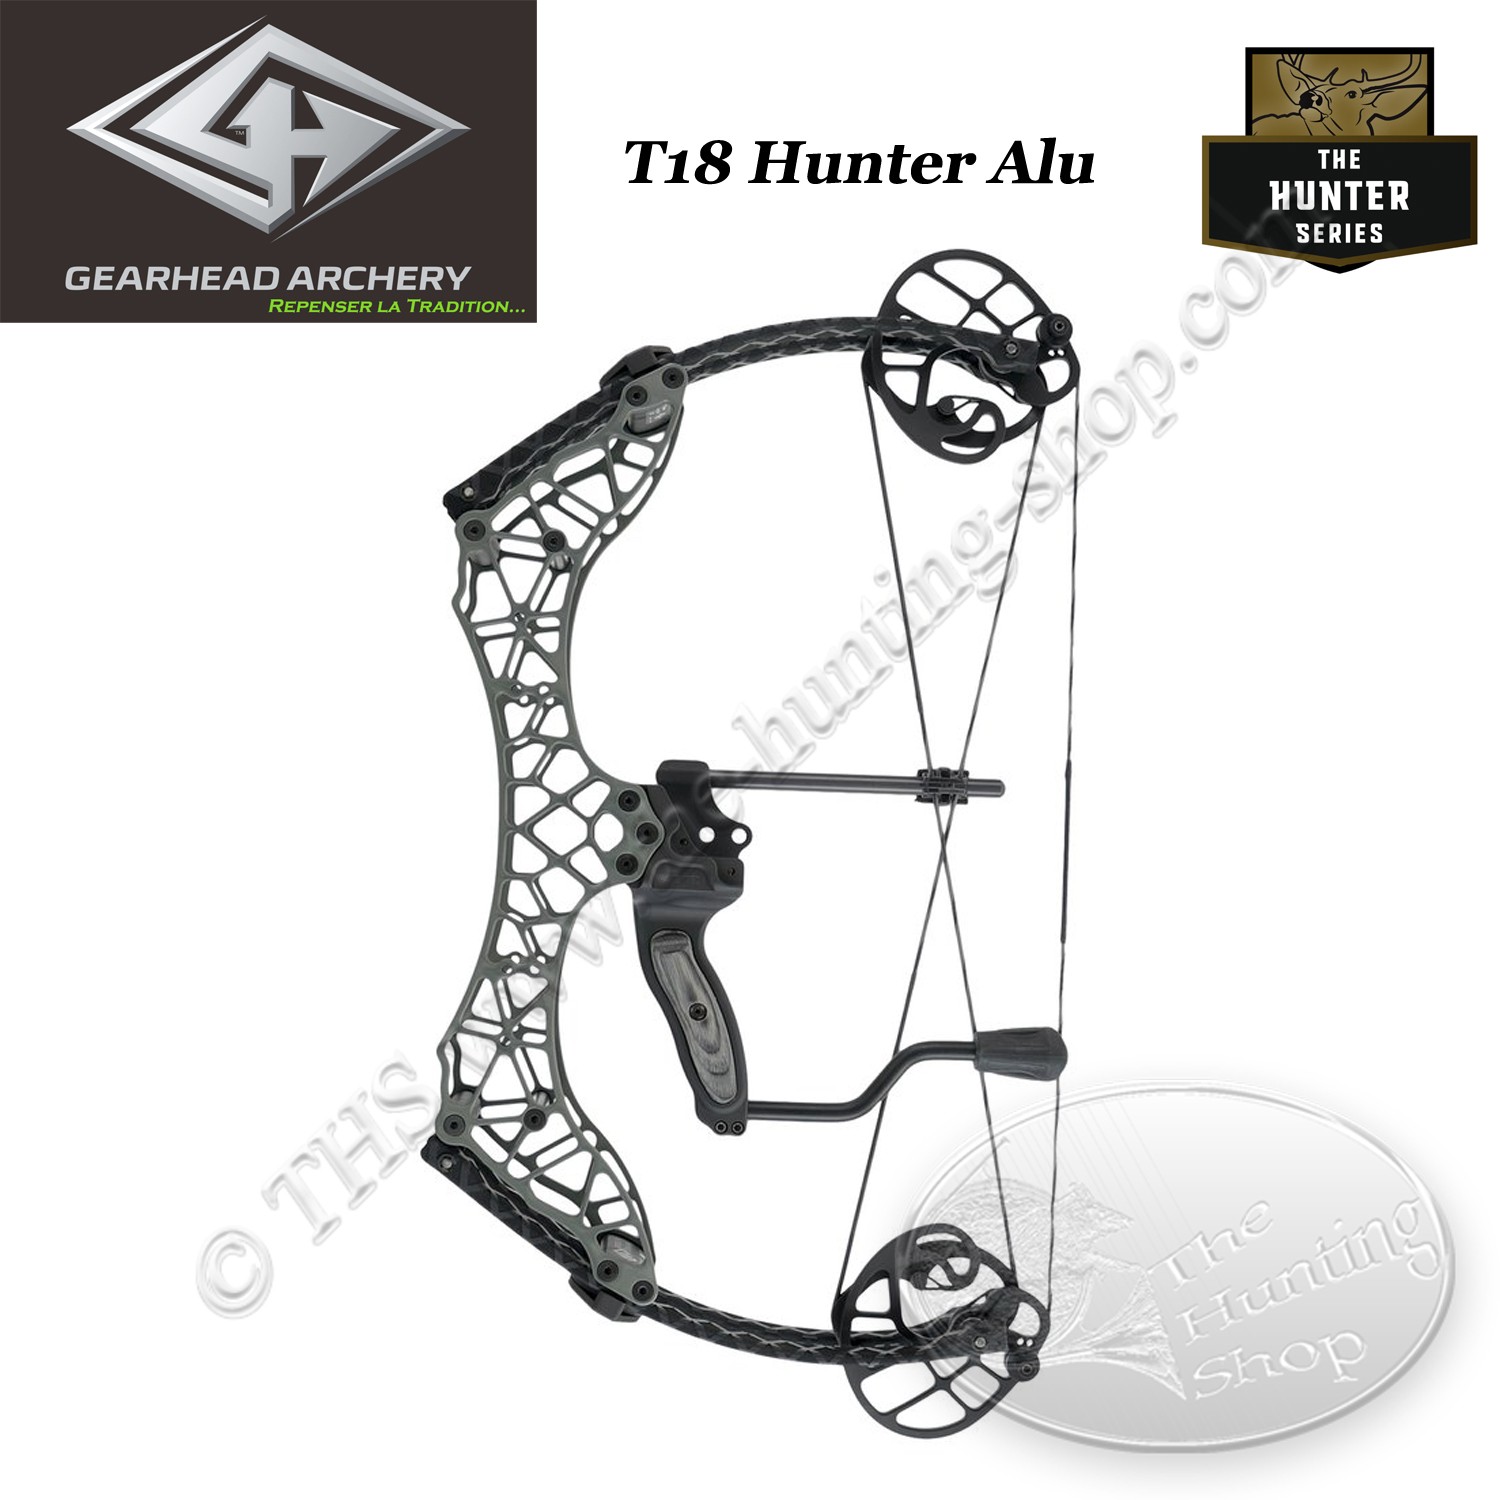 ultra compact compound bow